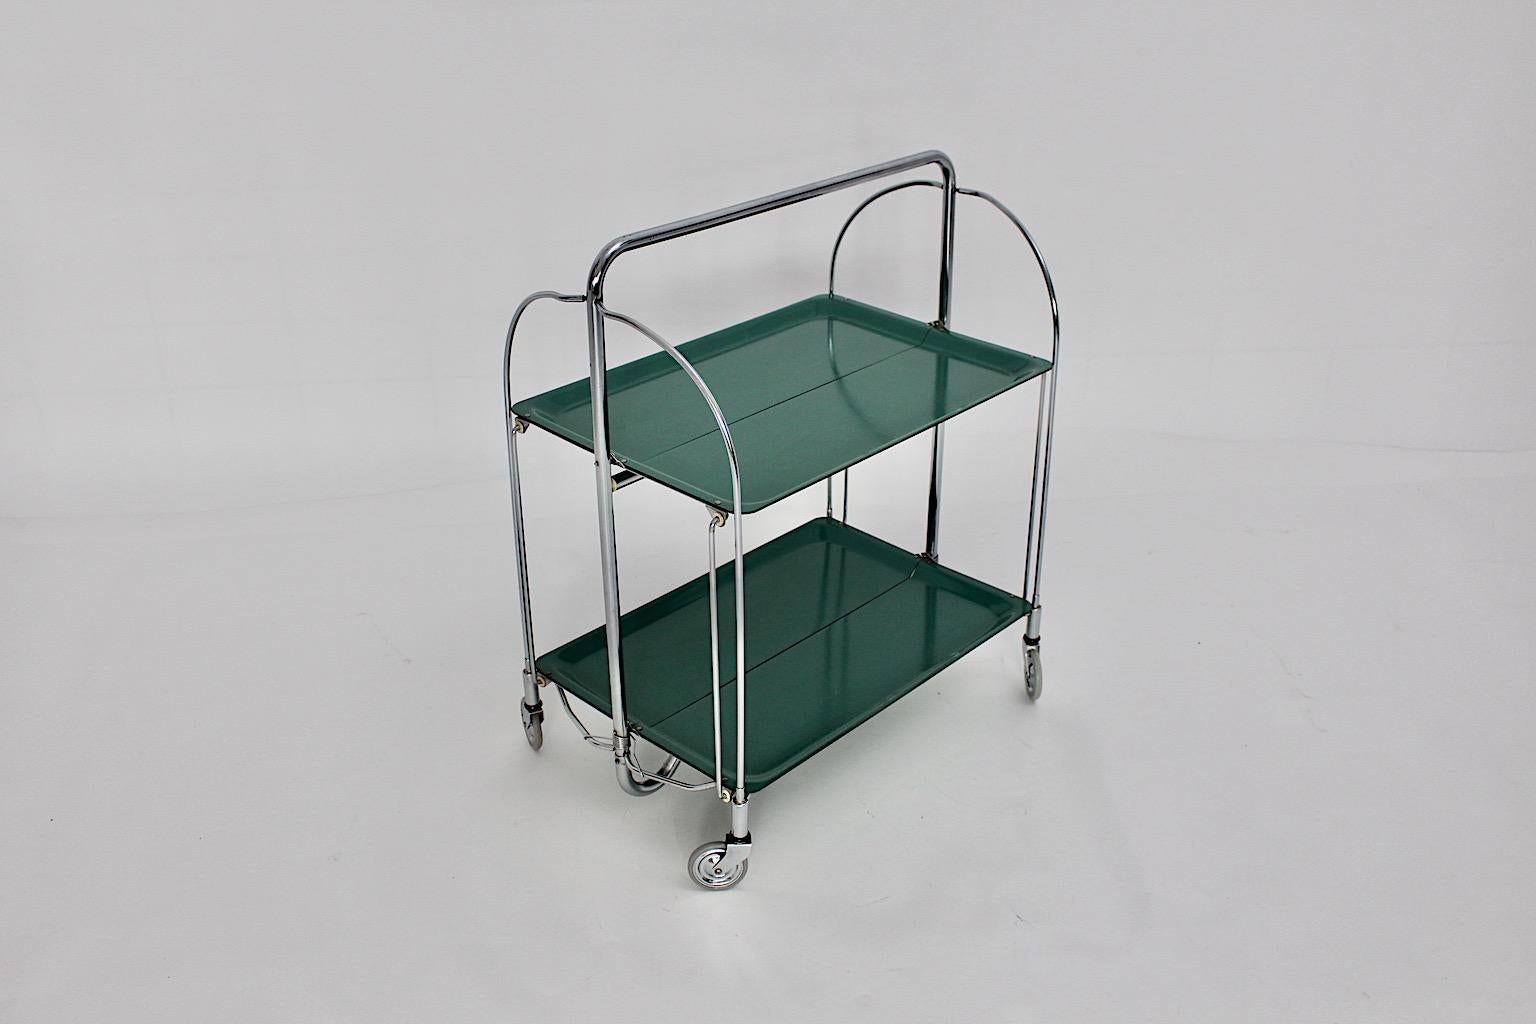 Space Age vintage bar cart or serving trolley from green formica plates and chromed metal frame 1970s.
Throughout its foldable parts on each side great to use in various dimensions. Four rubber wheels feature mobility.
Very good condition with